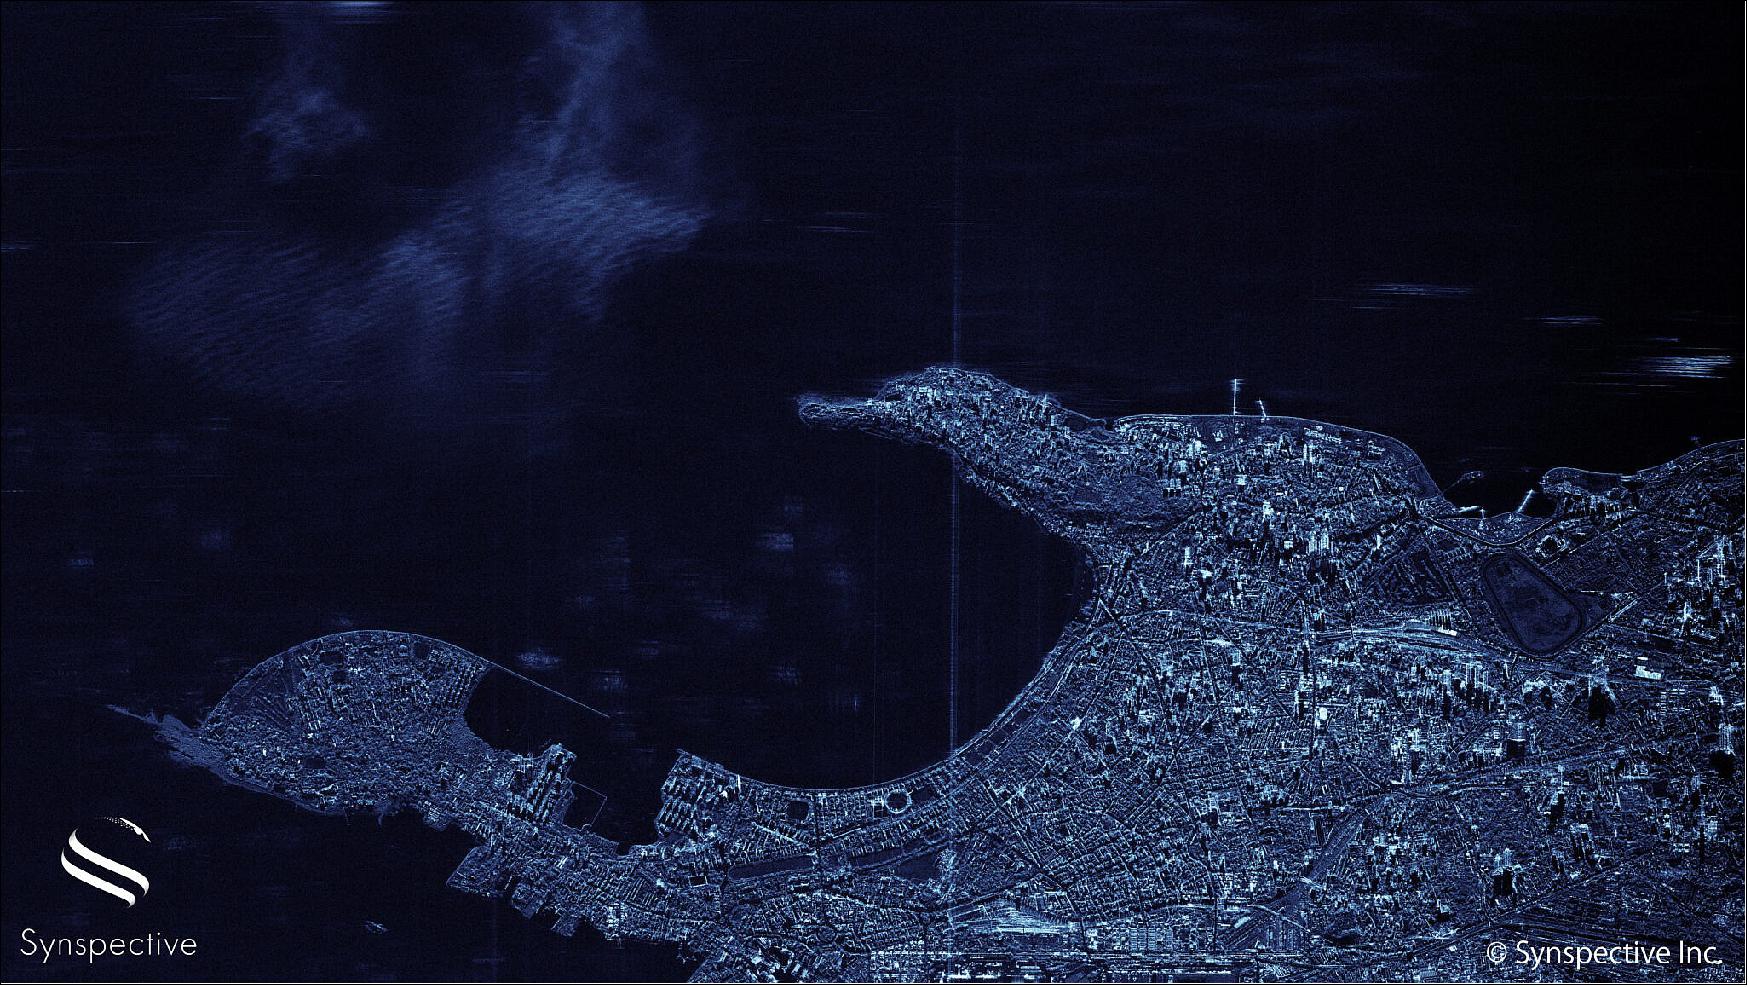 Figure 13: The image of Mumbai, a densely populated city on India’s west coast, was taken by StriX-α, Synspective’s first satellite launched in Dec 2020, using Sliding Spotlight mode. The radar sends pulses that illuminate Earth’s surface over a large elliptical antenna footprint (image credit: Synspective)